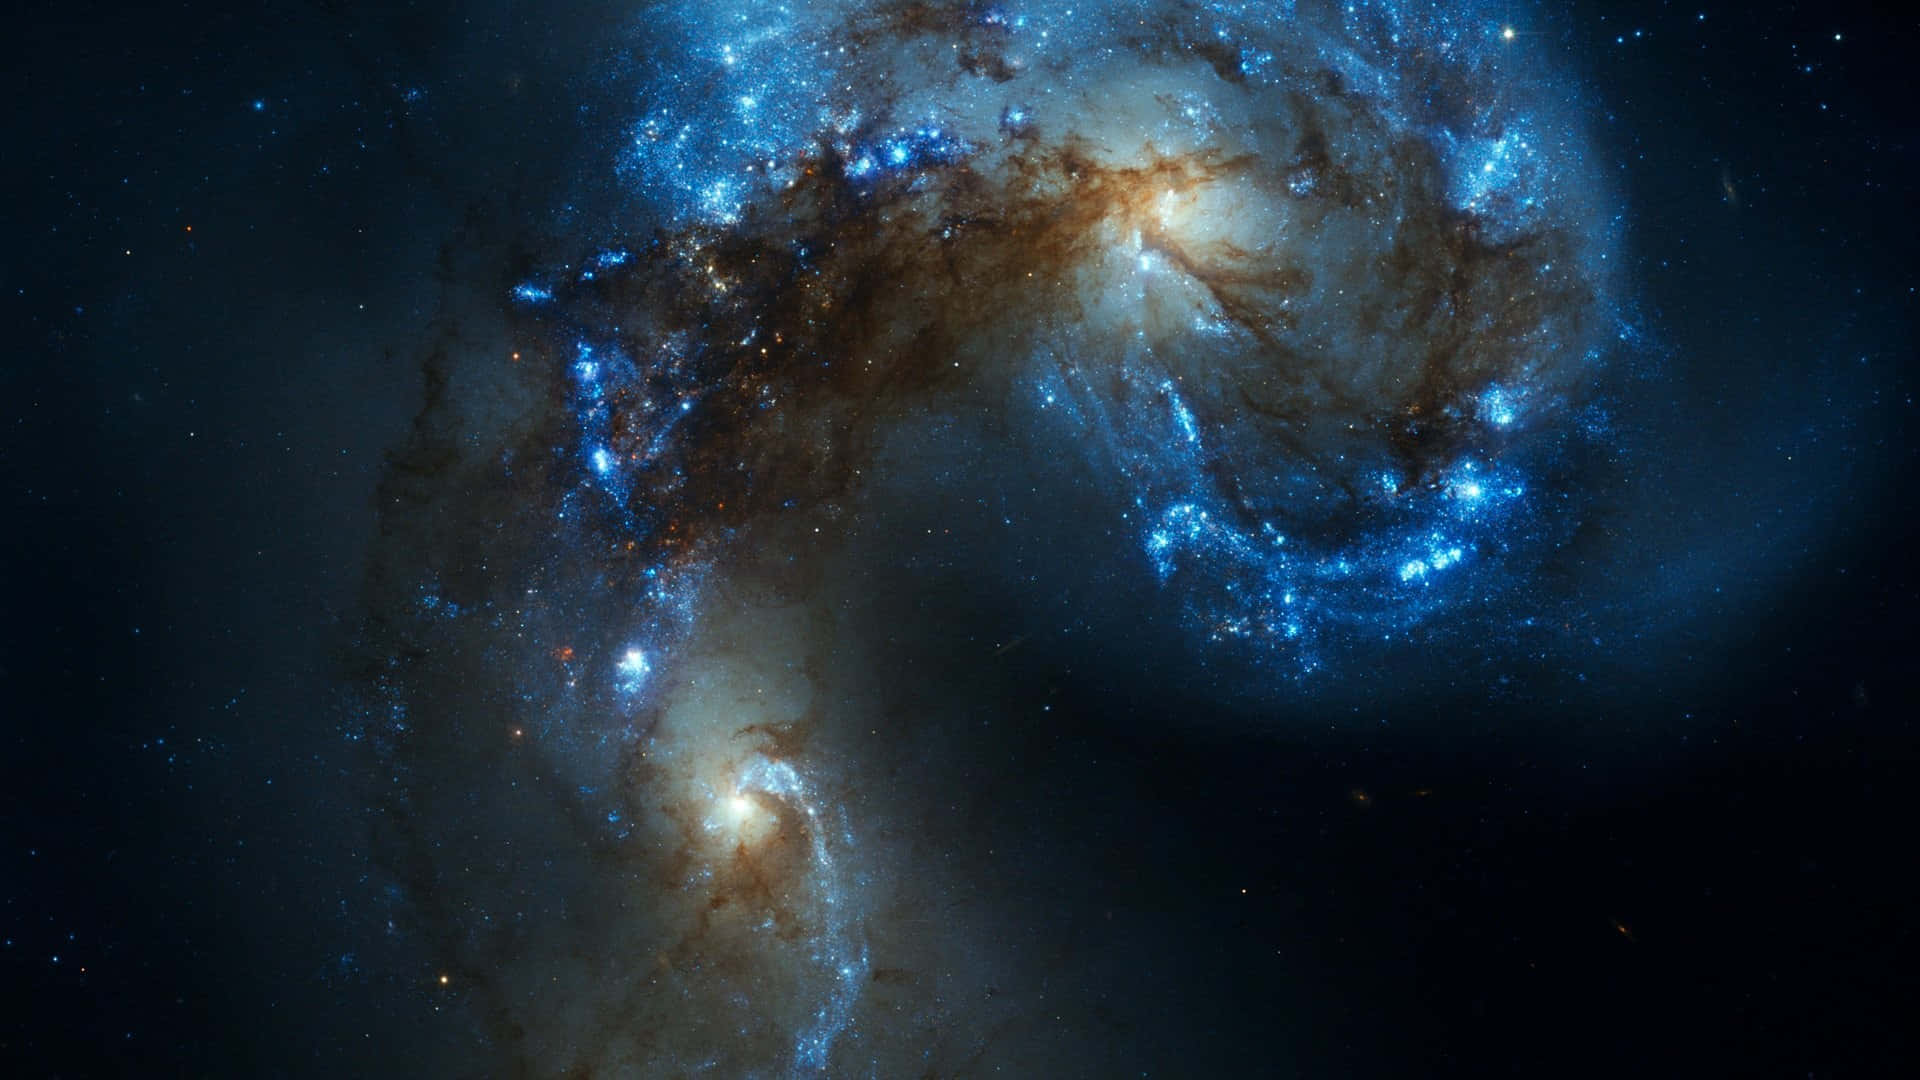 Explore the ancient stars and distant galaxies of the universe with the incredible Hubble 4K Space Telescope. Wallpaper